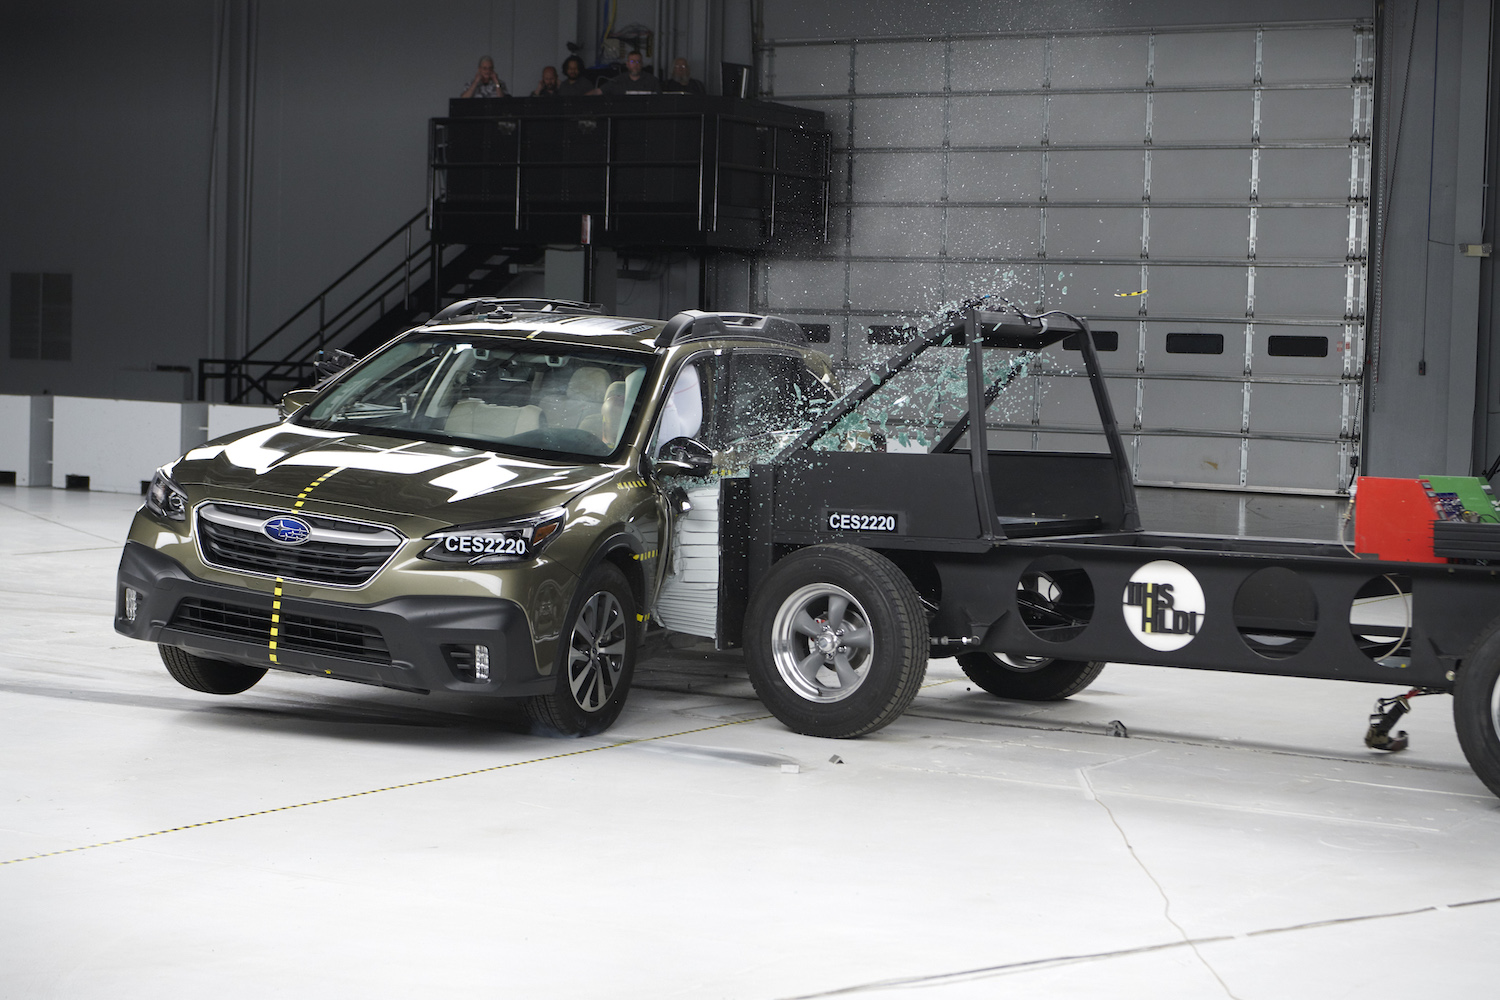 Action shot taken during the Institute's new side-impact crash test being conducted on the 2022 Subaru Outback SUV